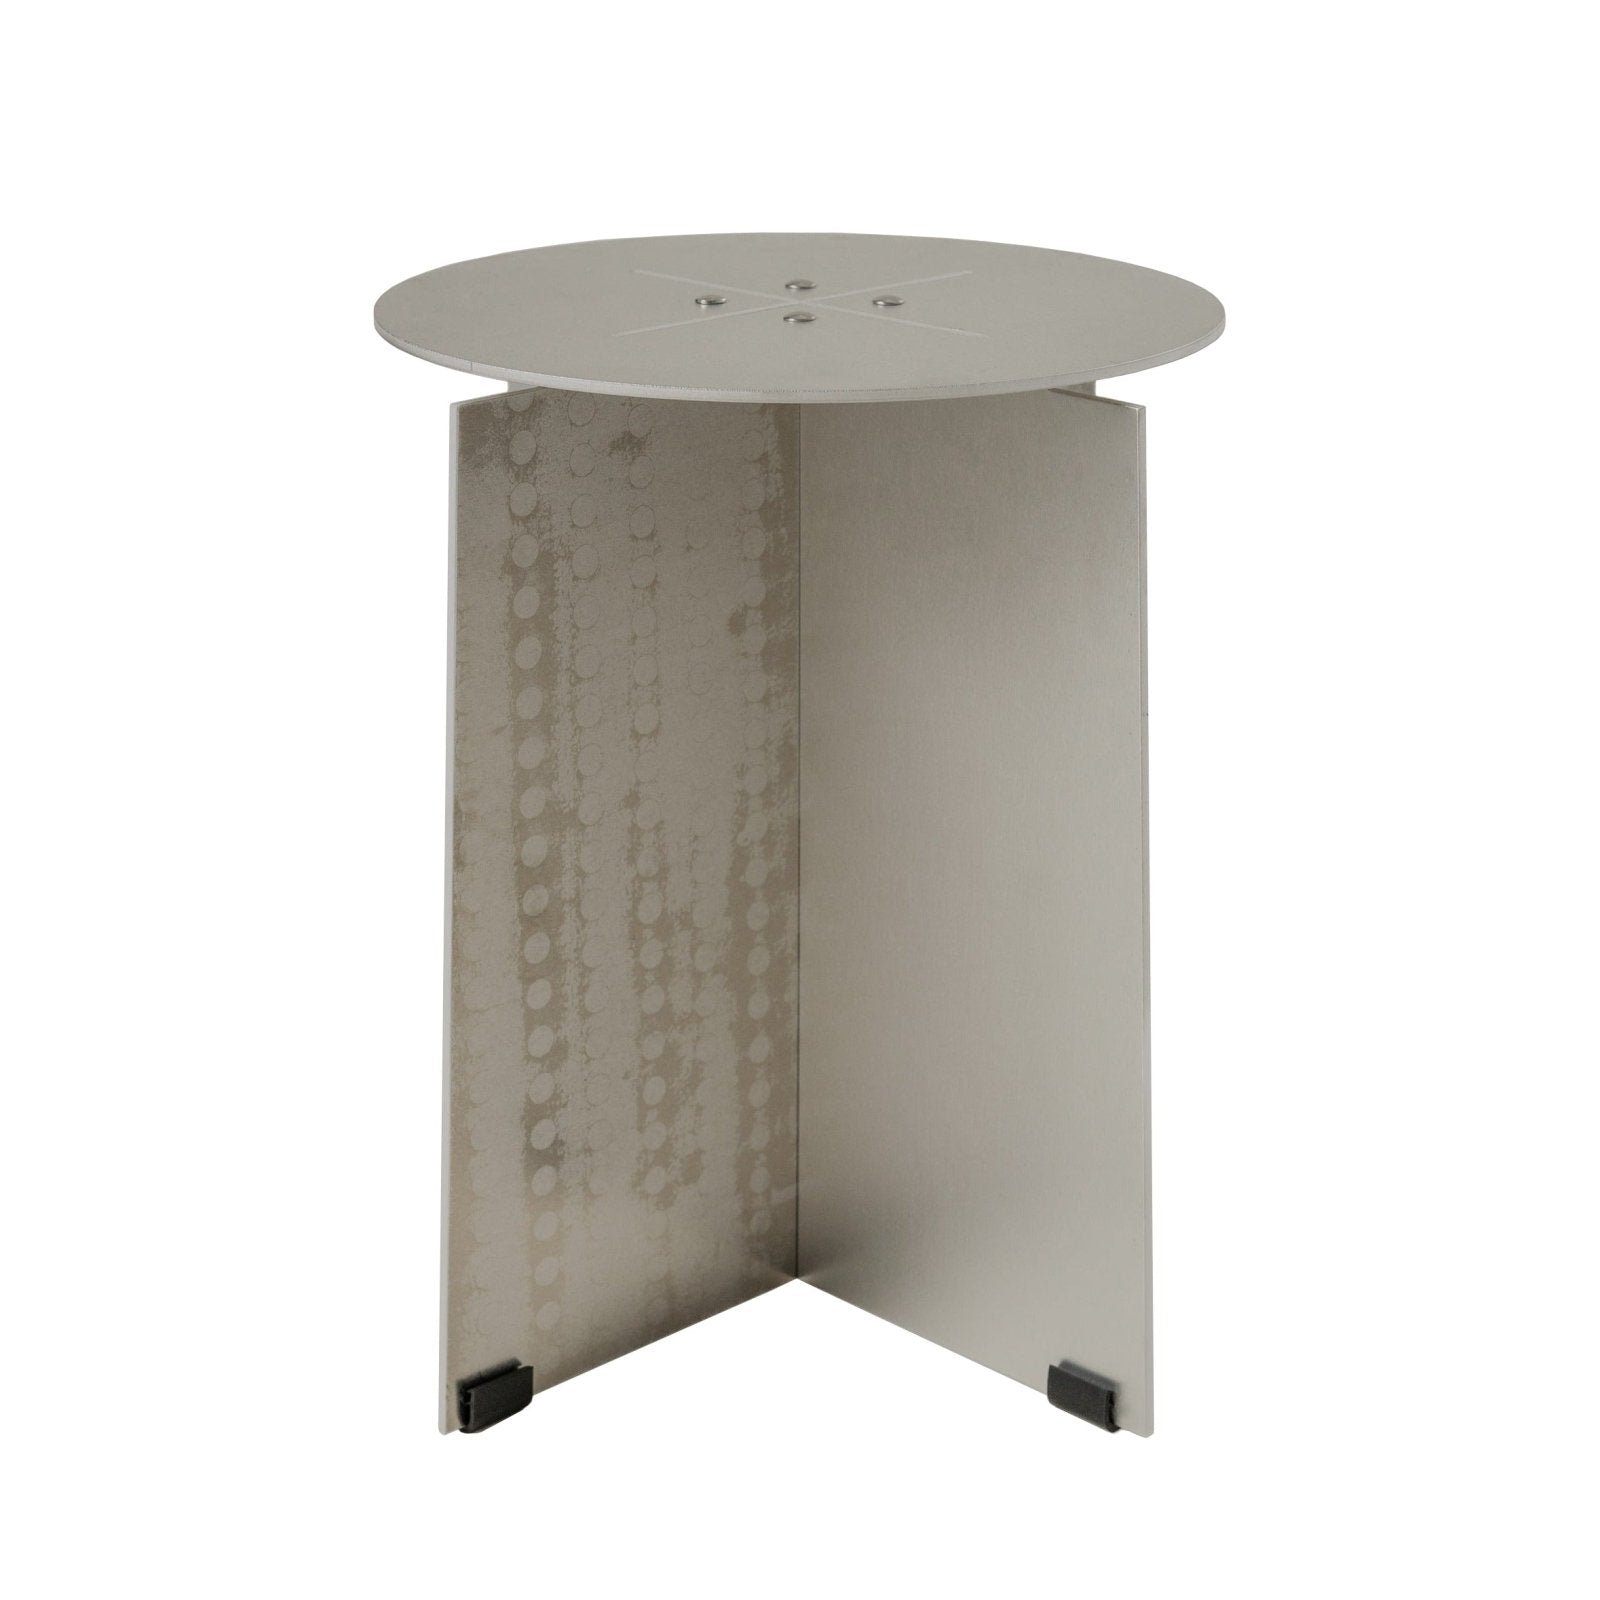 SOPHIE.STOOL - Stool / Side table Side table by LOES.BETA.GMBH